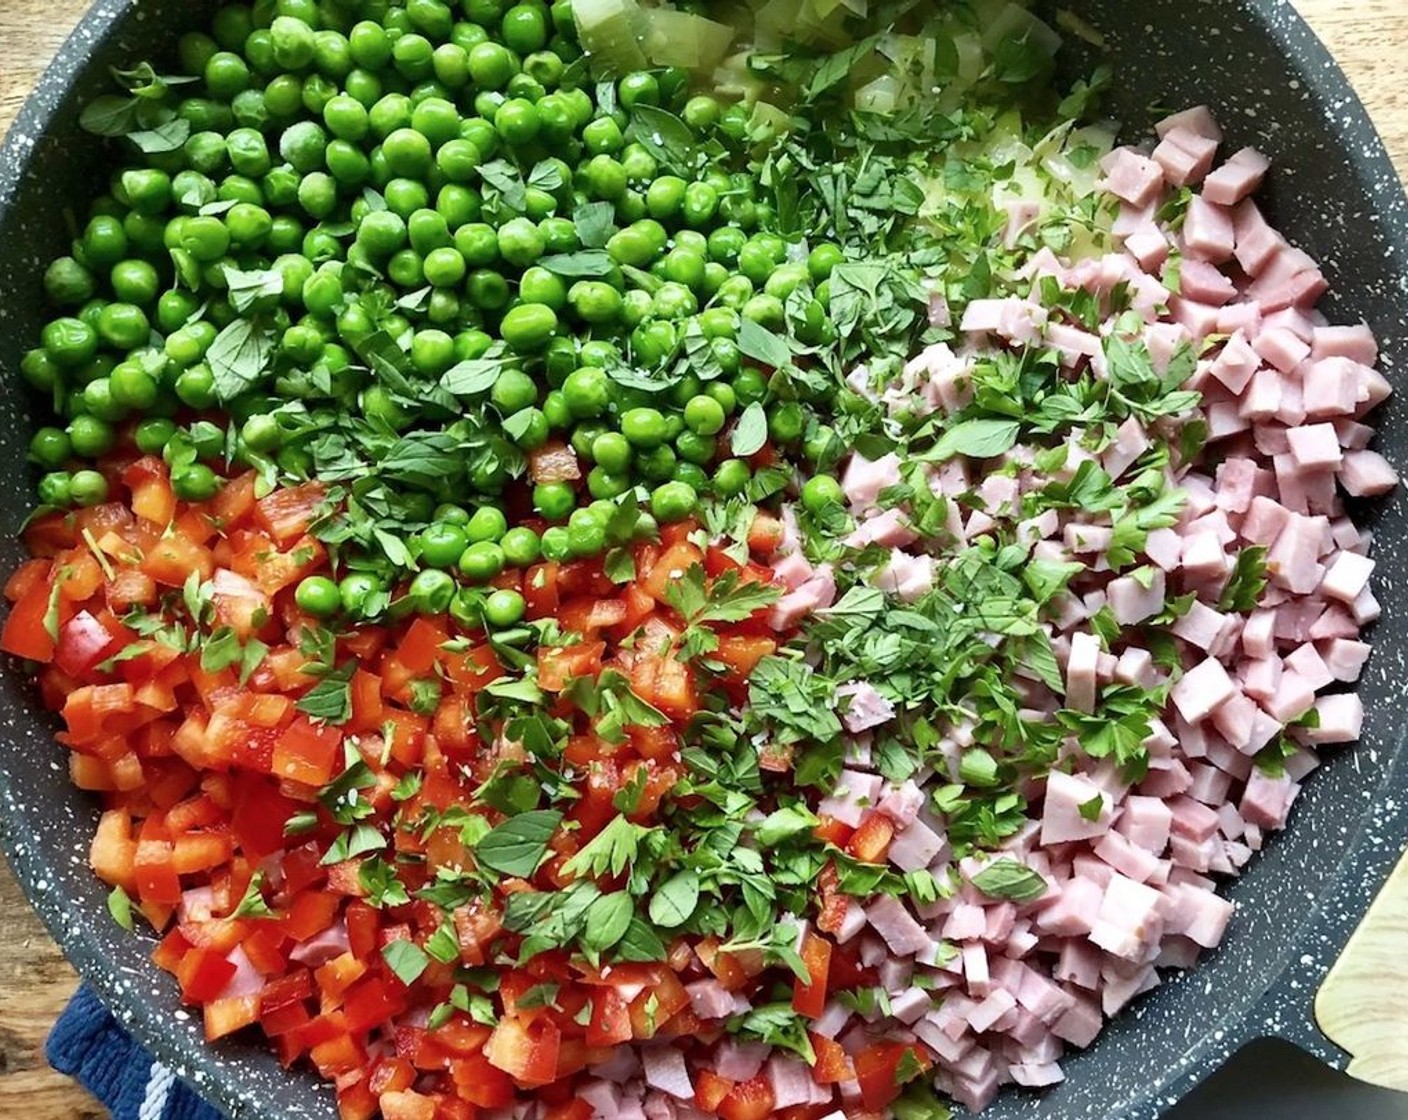 step 7 Stir in cubed Cooked Ham (1 lb), Red Chili Peppers (2 cups), Frozen Green Peas (1 cup), Fresh Oregano (2 Tbsp), and Fresh Parsley (2 Tbsp). Cool for 10 minutes.